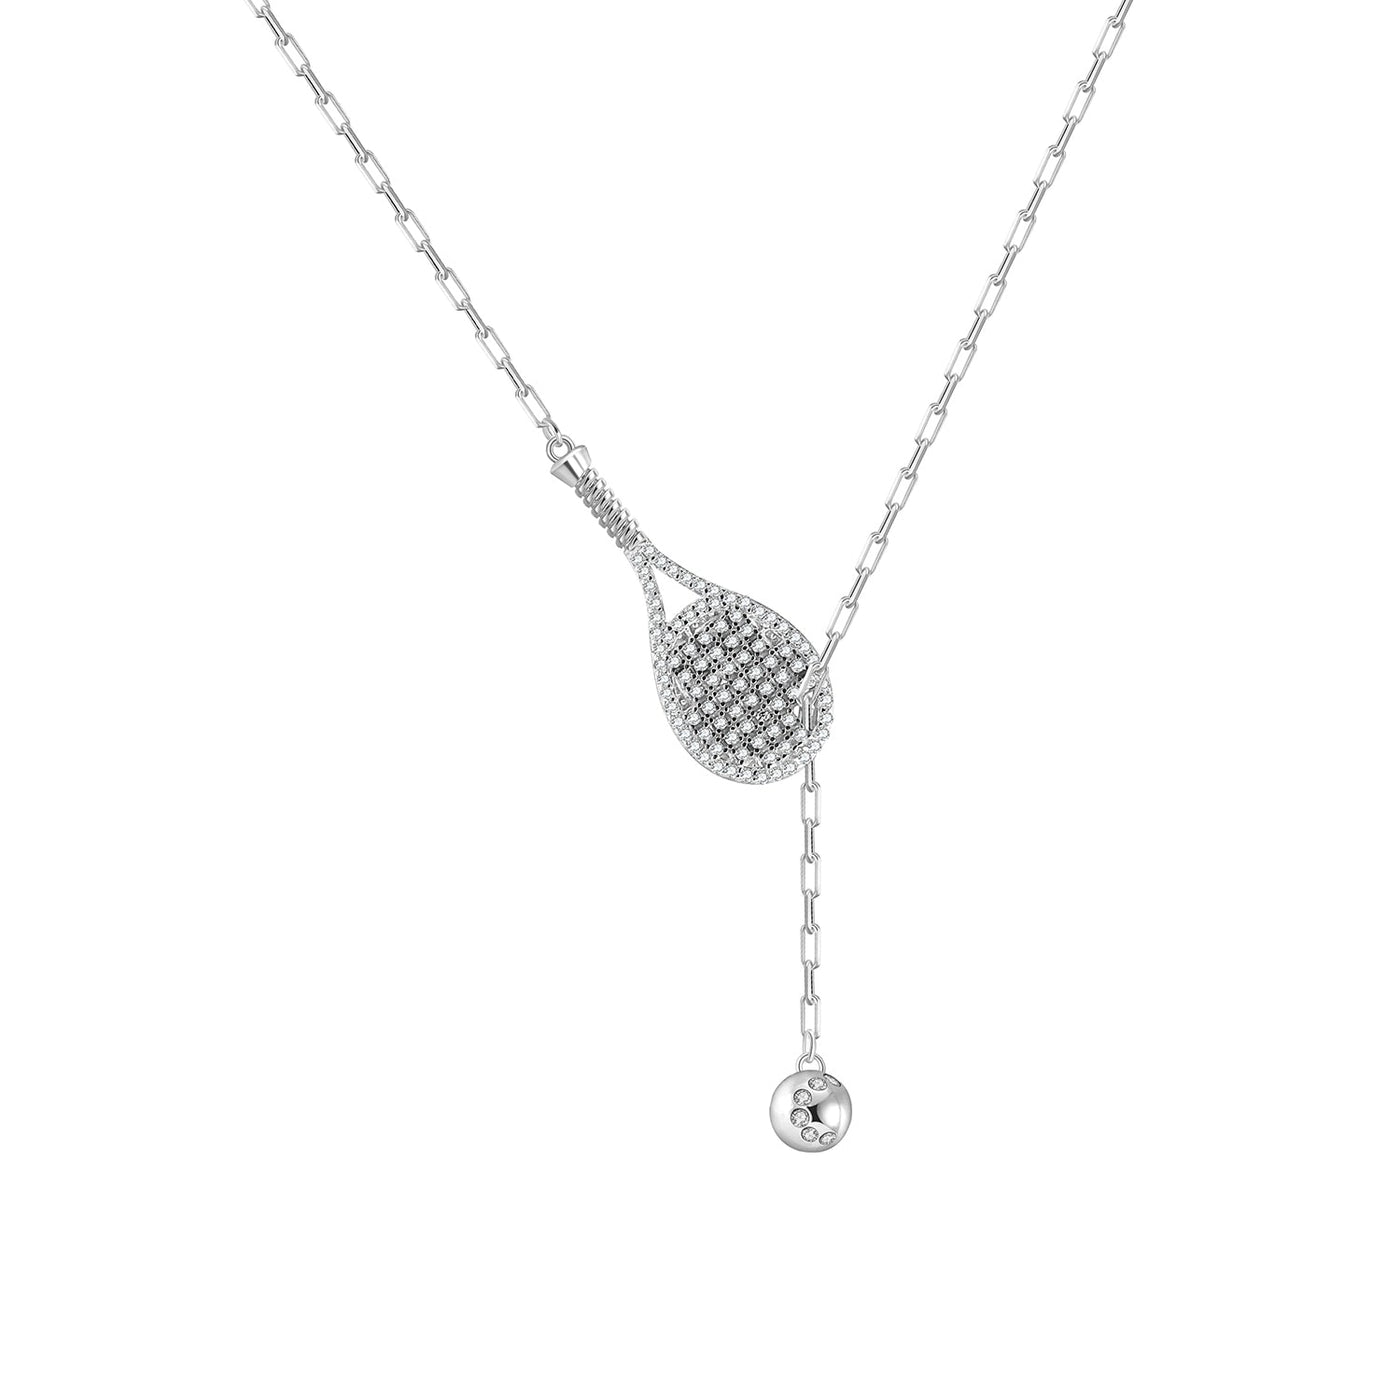 LoveMatch Tennis Lariat Plus Racket and Ball Necklace Silver